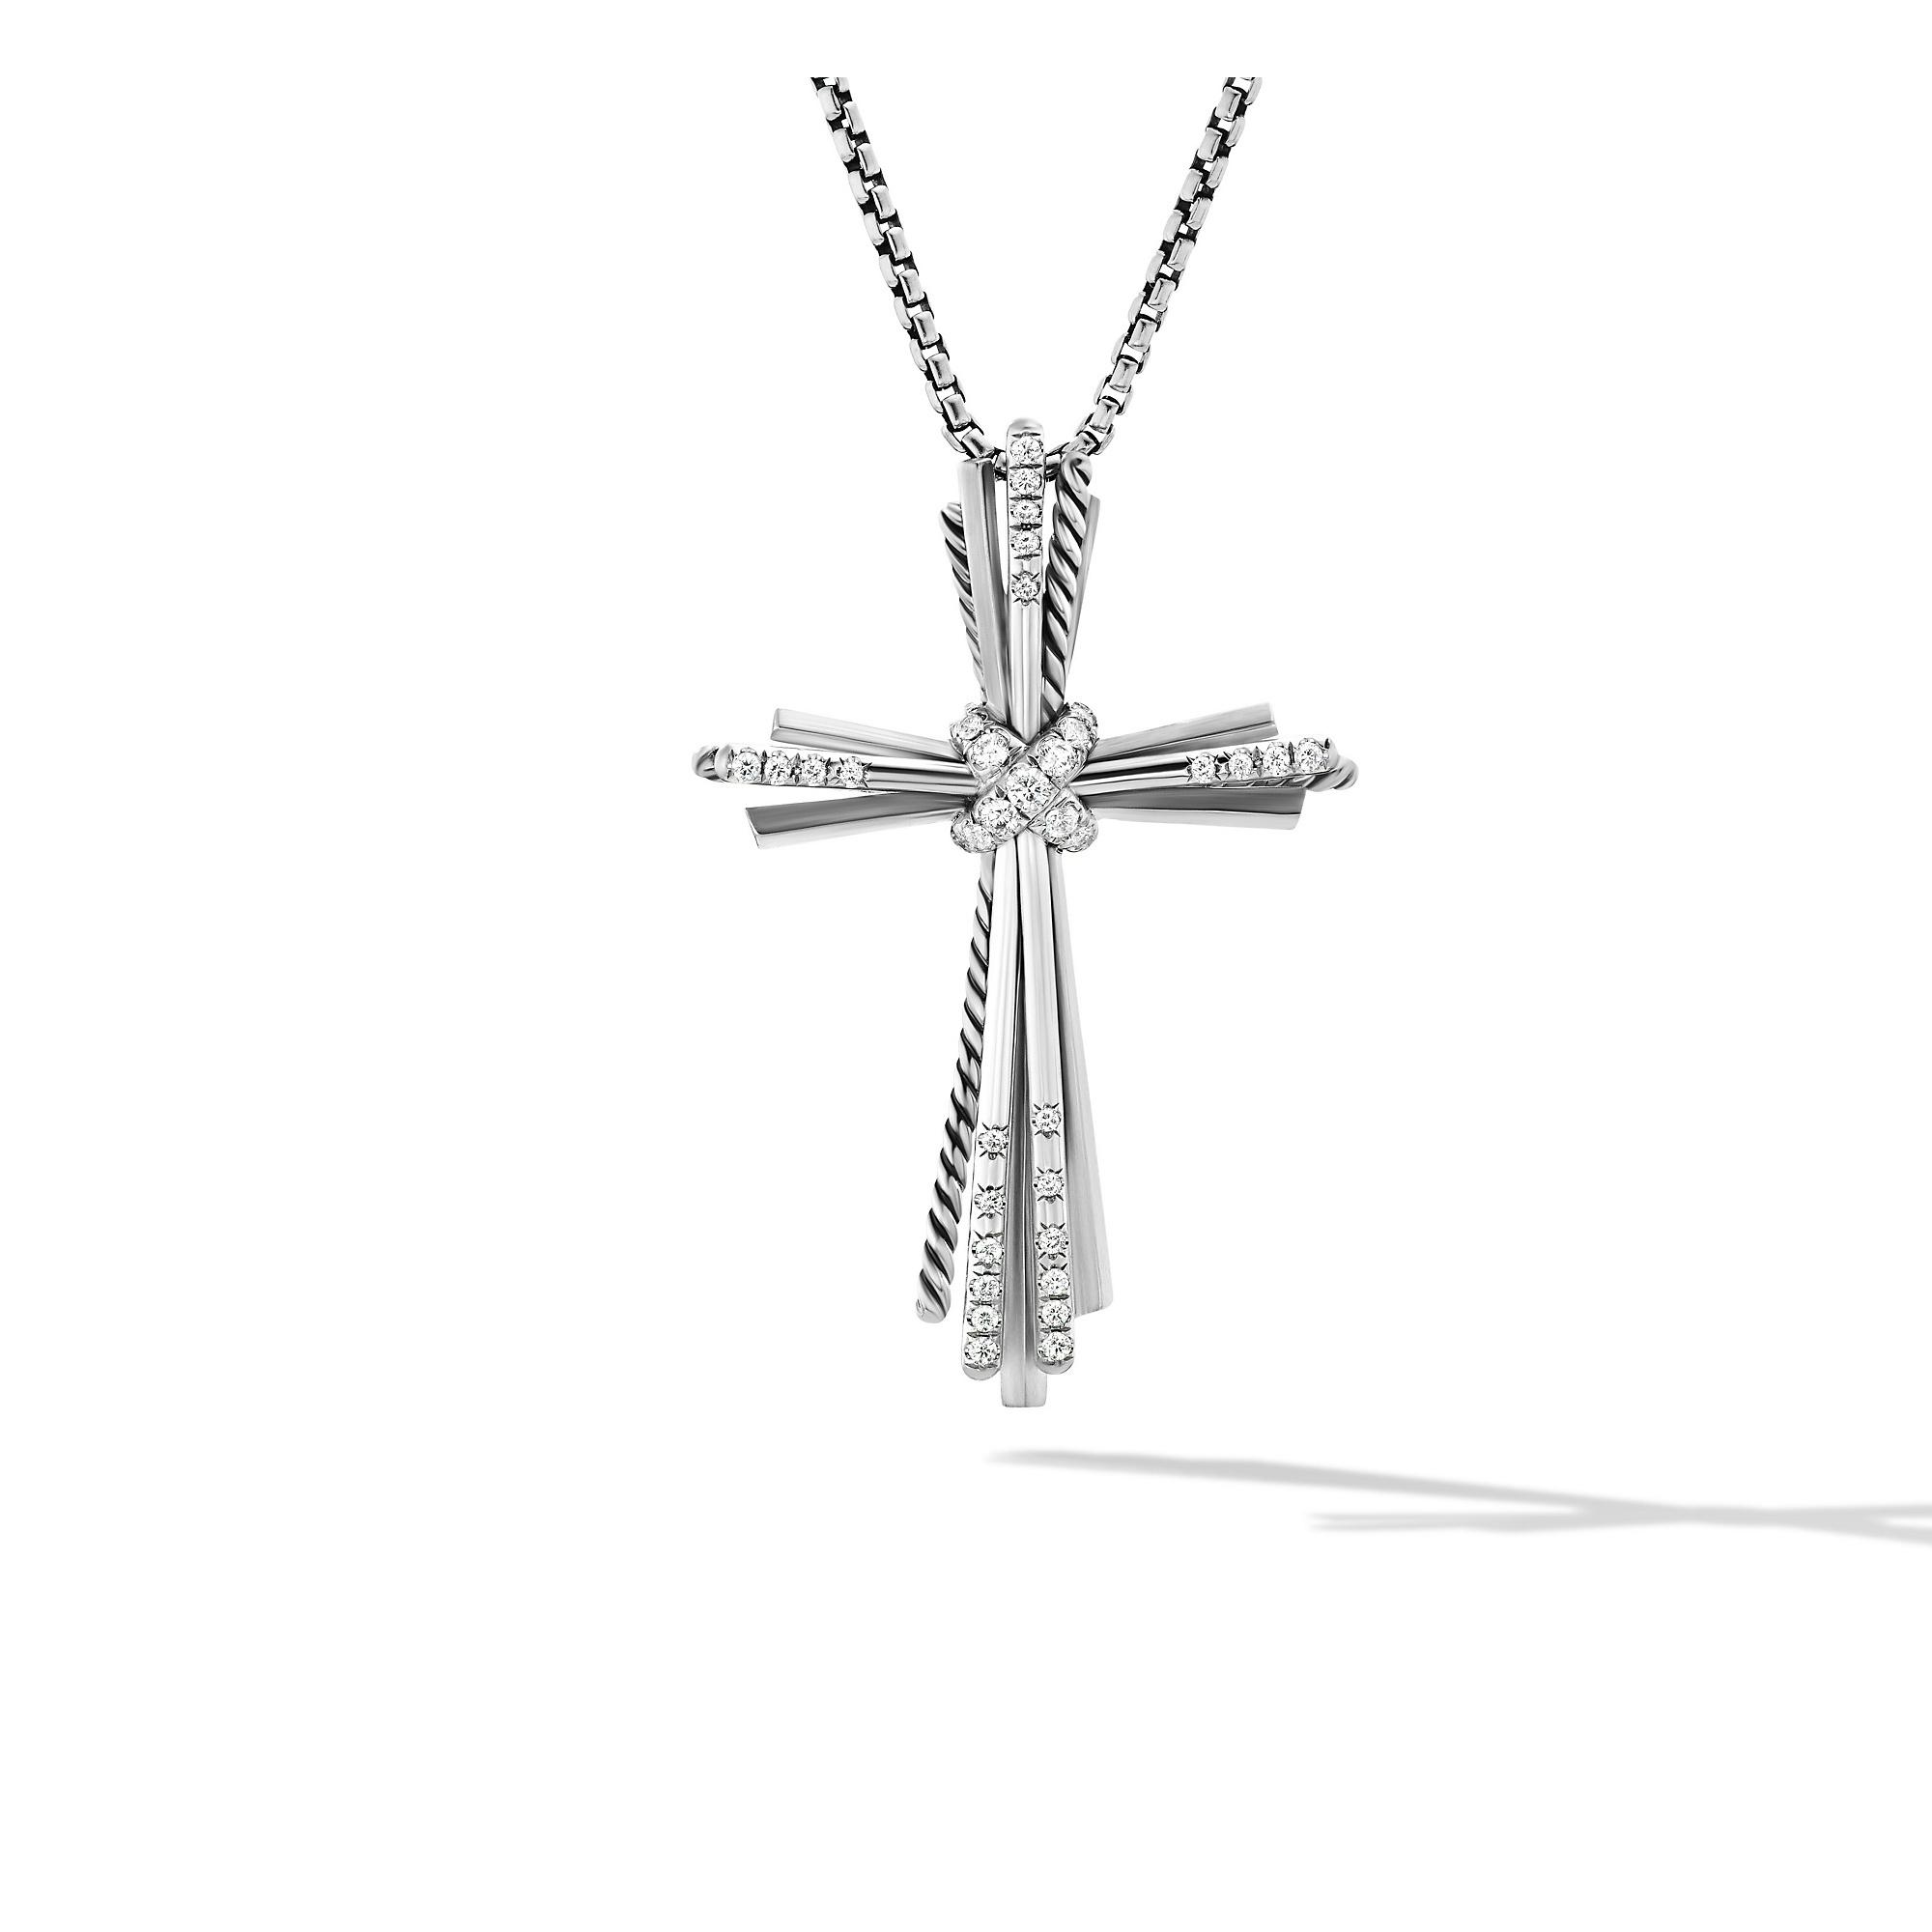 David Yurman Angelika Cross Necklace in Sterling Silver with Pave Diamonds